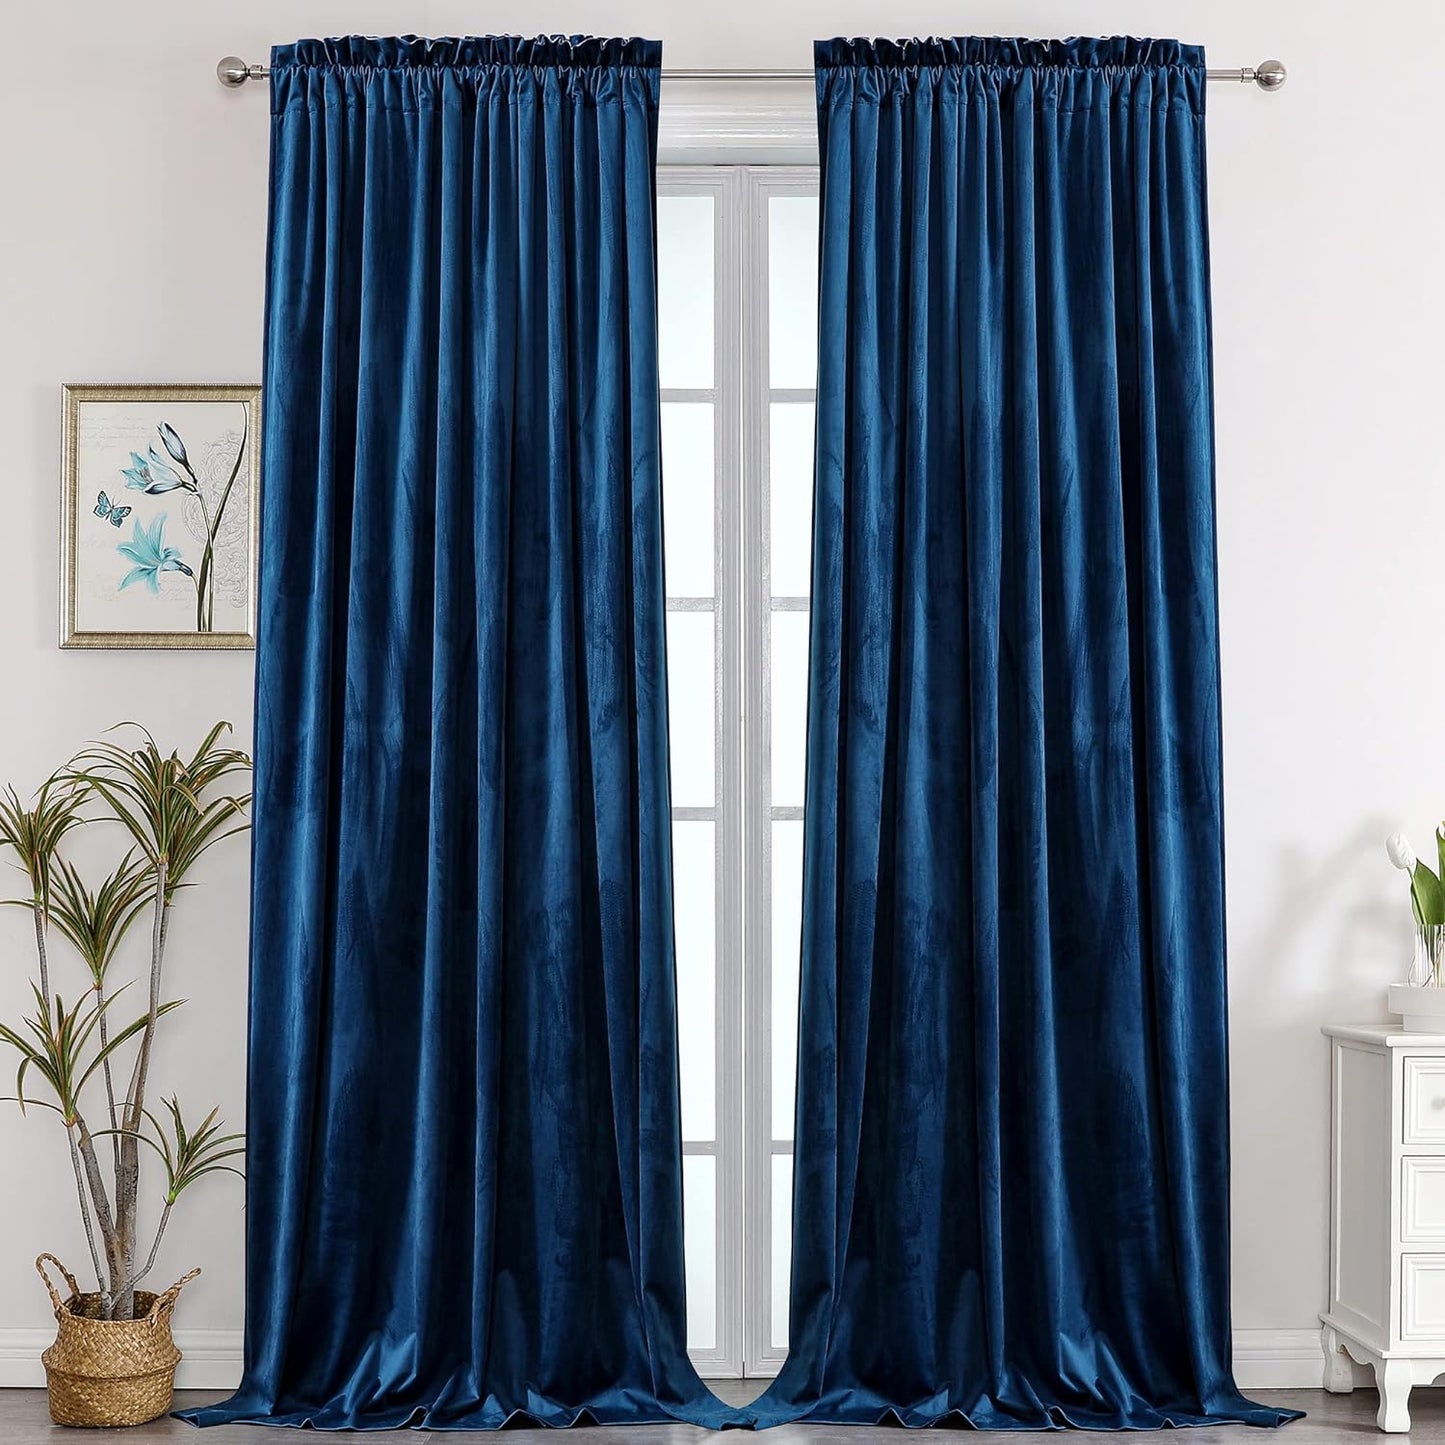 Benedeco Green Velvet Curtains for Bedroom Window, Super Soft Luxury Drapes, Room Darkening Thermal Insulated Rod Pocket Curtain for Living Room, W52 by L84 Inches, 2 Panels  Benedeco Navy W52 * L63 | 2 Panels 